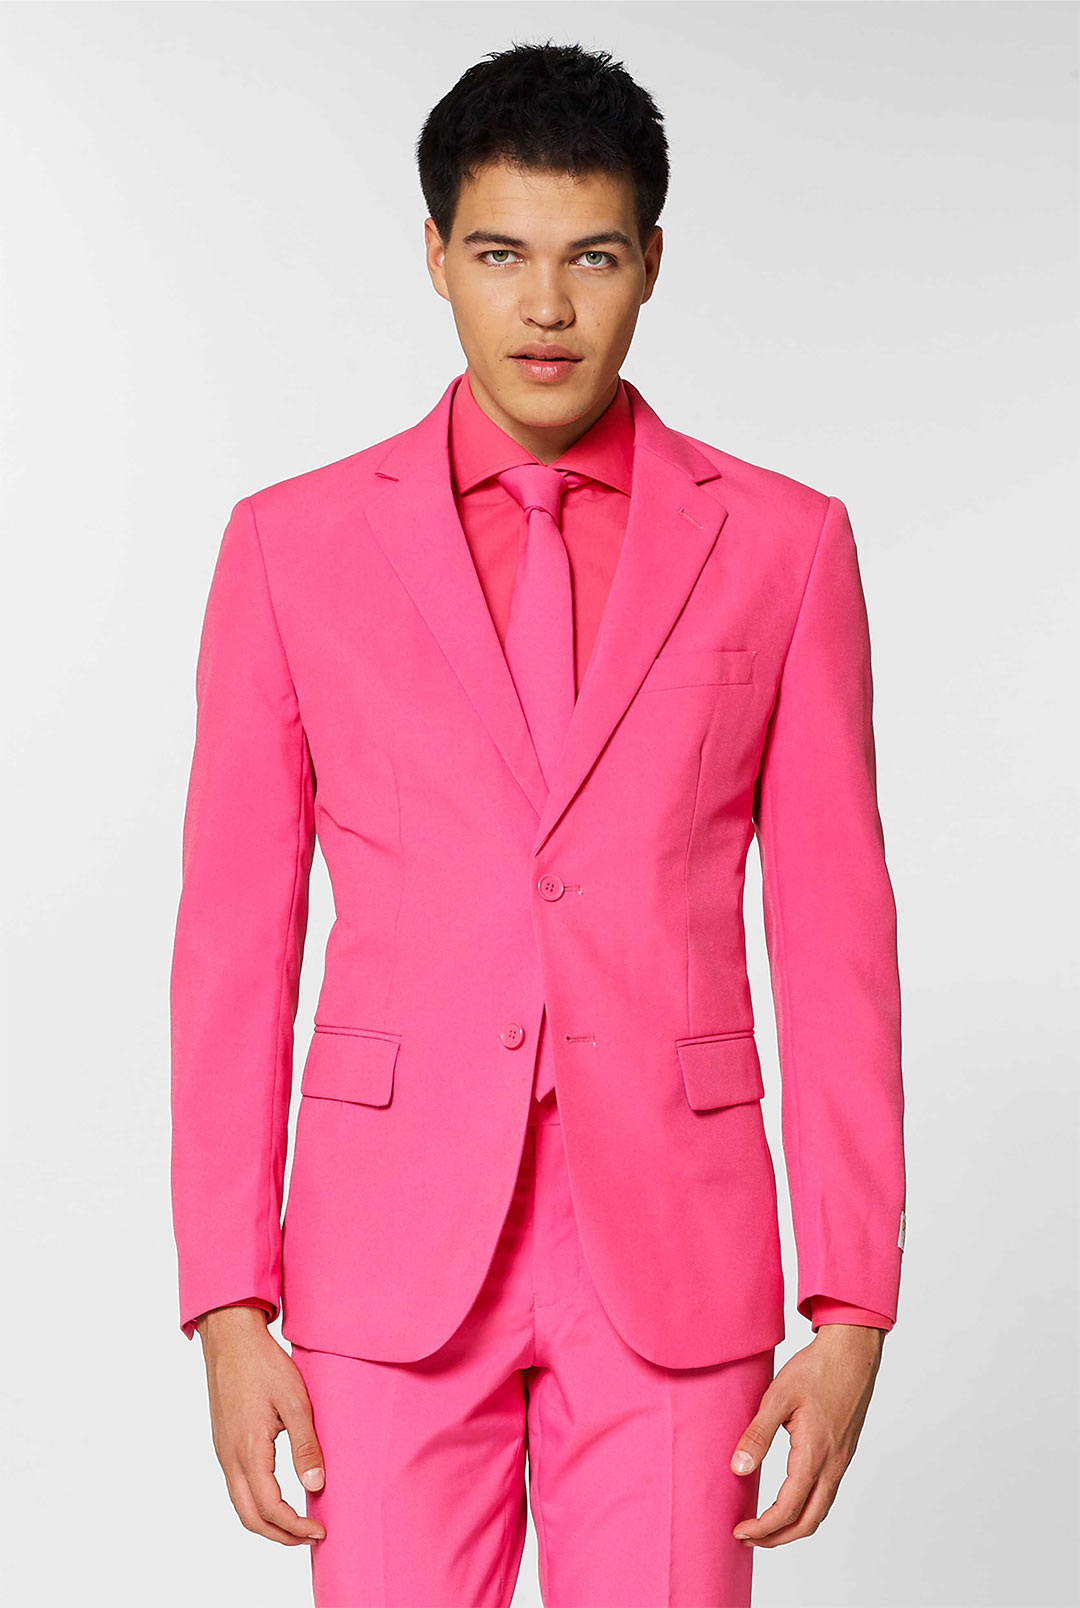 All Pink Suit with Blue Shirt